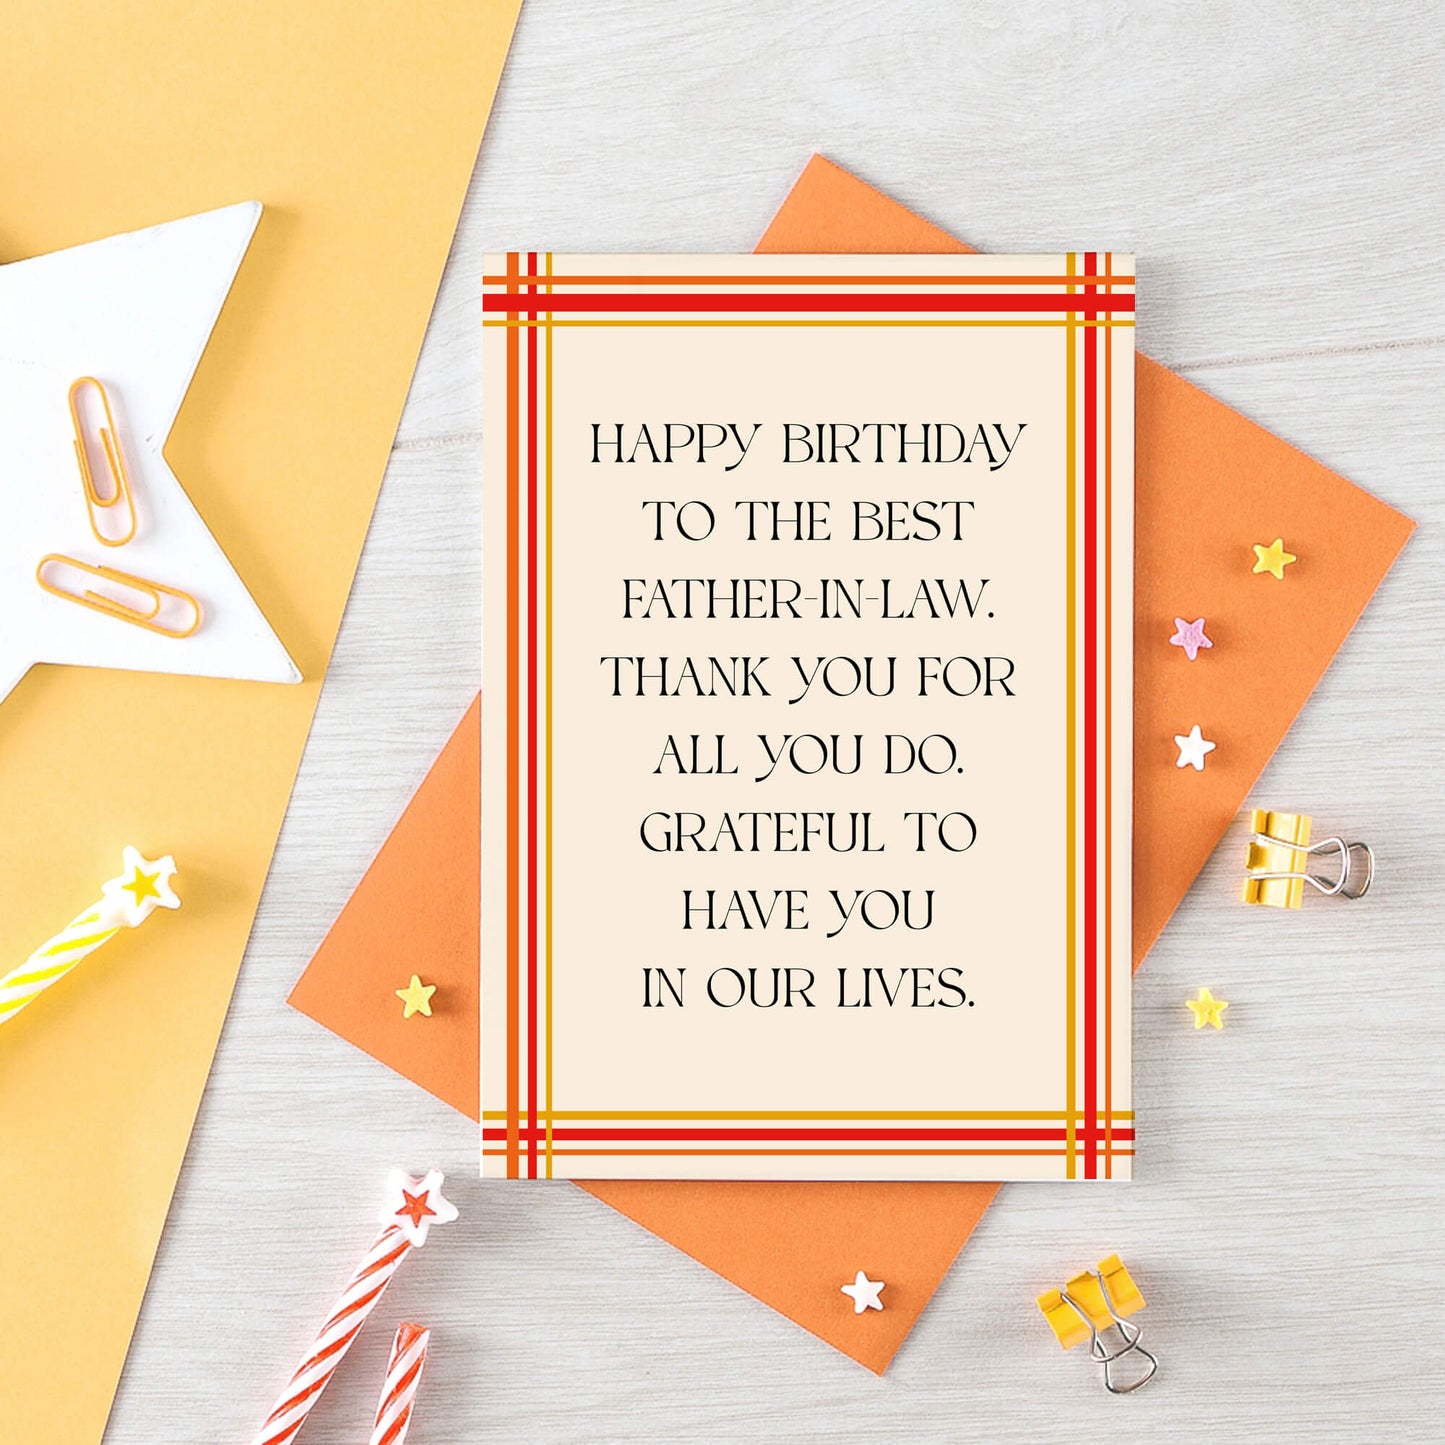 Father-in-Law Birthday Card by SixElevenCreations. Reads Happy birthday to the best father-in-law. Thank you for all you do. Grateful to have you in our lives. Product Code SE0902A6